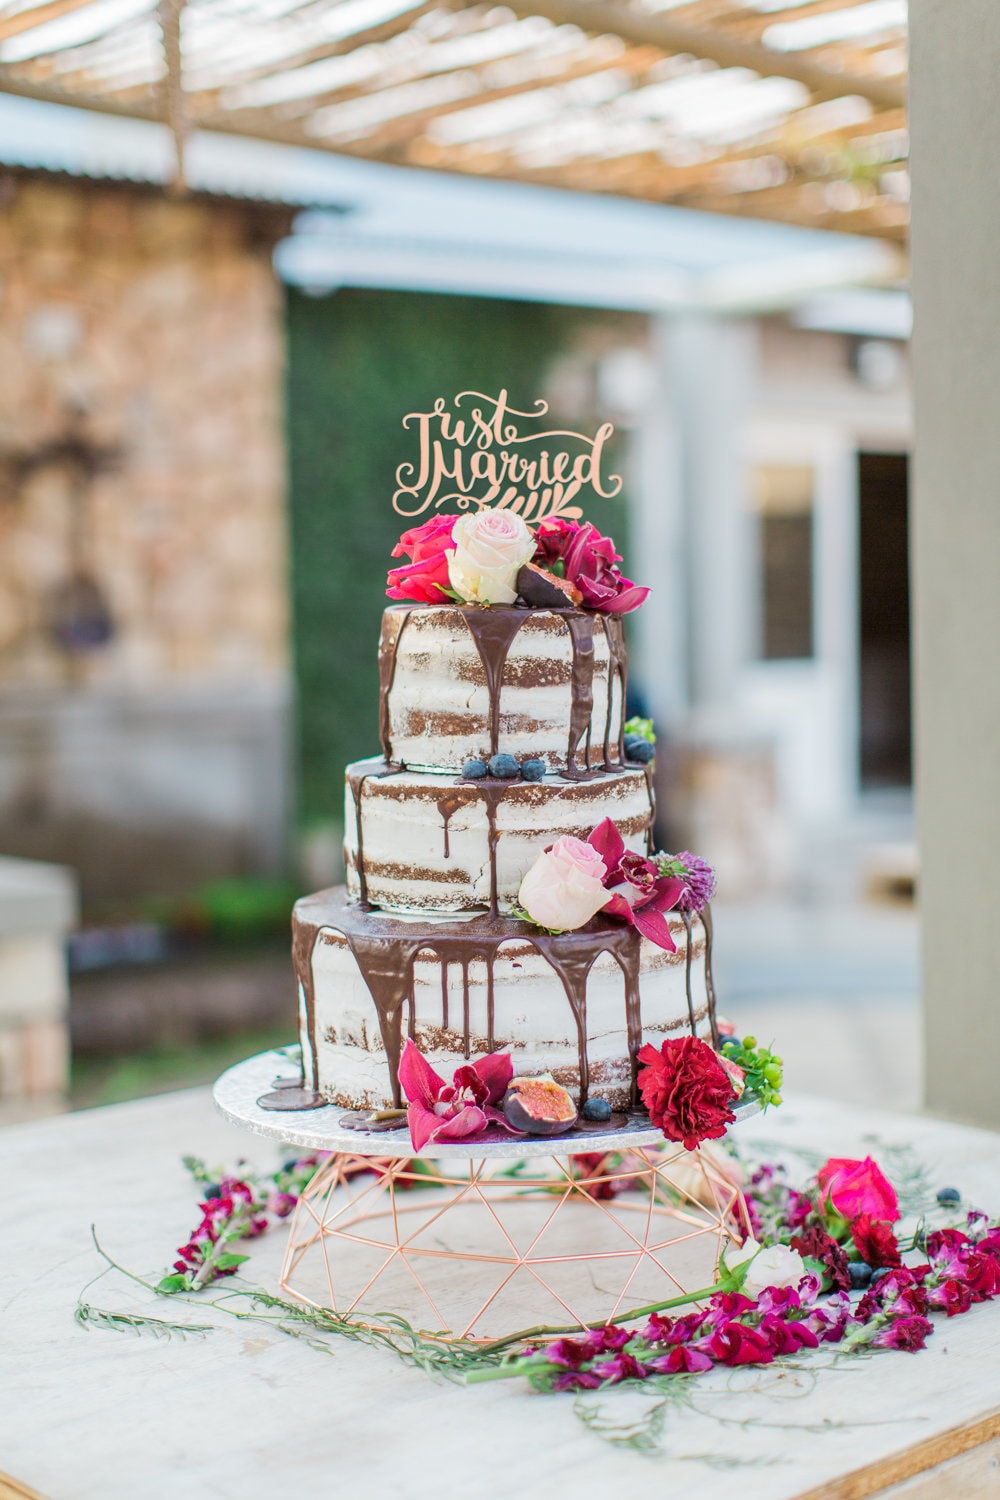 Naked Chocolate Drip Drizzle Cake | Image: Grace Studios